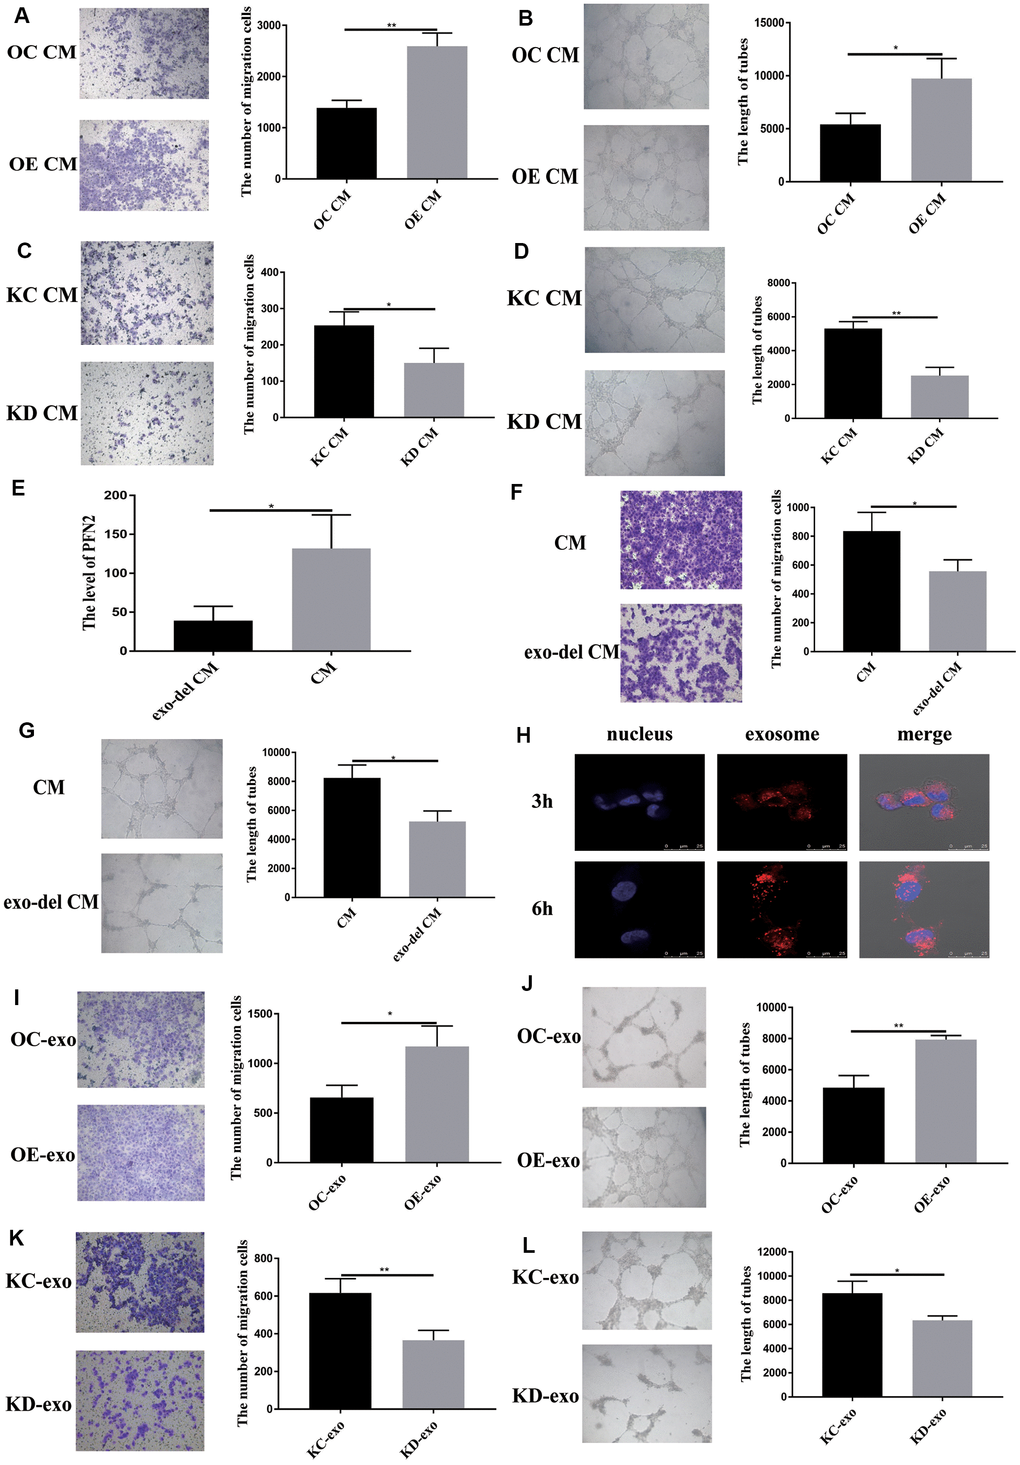 Exosomal PFN2 from H446 cells affect migration and tube formation ability of HUVEC cells. Co-culturing with H446-OE conditioned medium promoted (A) migration (P=0.0022) and (B) tube formation ability (P=0.0255) of HUVEC cells. Co-culturing with H446-KD cells conditioned medium remarkably decreased the migration (P=0.0319) (C) and tube formation ability (P=0.0017) (D) of HUVEC cells. When the exosomes are removed from the CM, PFN2 expression in the CM is significantly decreased (P=0.0267) (E). Exosome depletion from the CM weakens the migration (P=0.035) (F) and tube formation ability (P=0.0112) (G) of HUVEC cells. Exosomes derived from H446 cells could be internalized in HUVEC cells (H). OE-exo elevated the migration (P=0.02) (I) and tube length (P=0.0029) (J) of HUVEC cells. However, KD-exo inhibited the migration (P=0.0093) (K) and tube length (P=0.03) (L) of HUVEC cells.